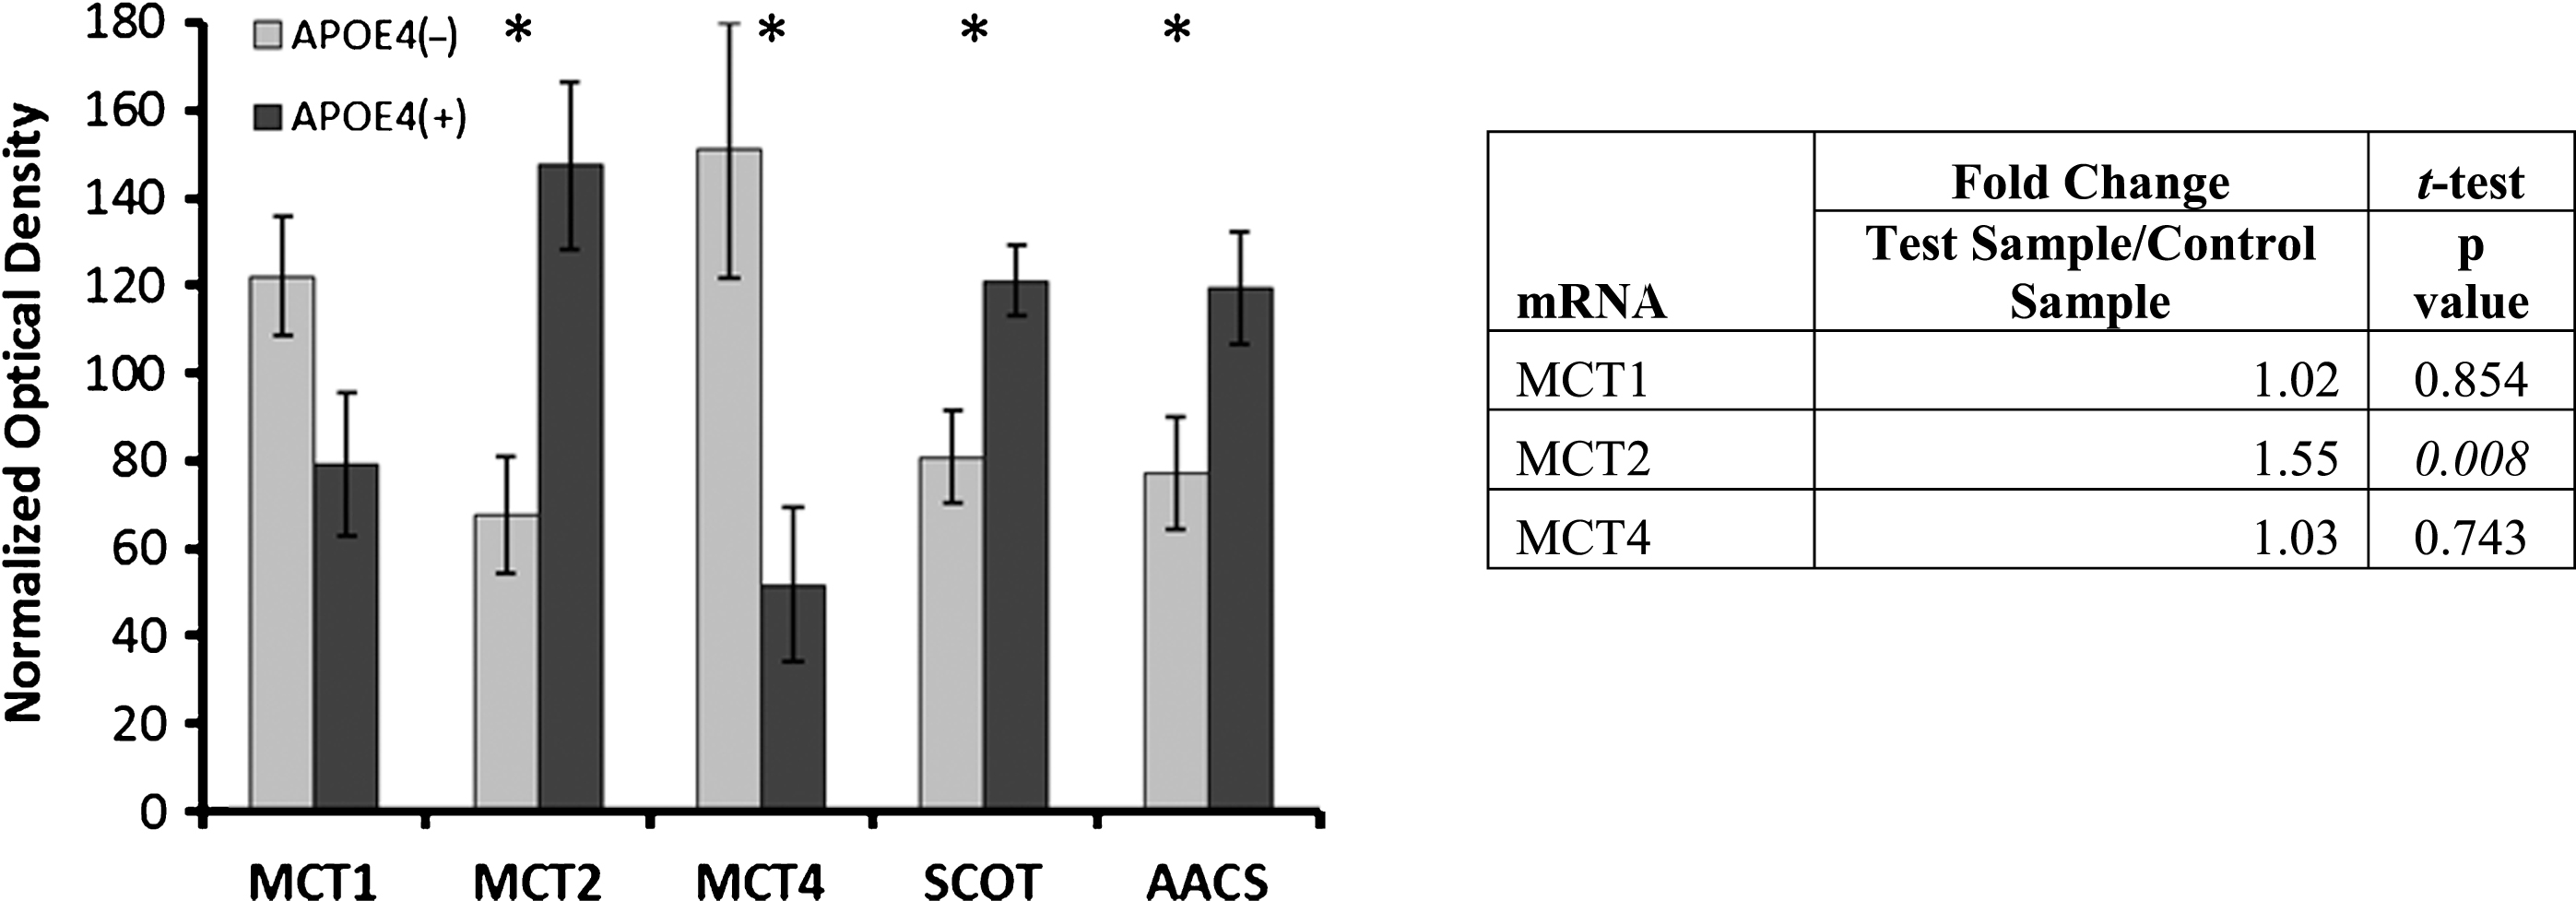 Alterations in ketone metabolism in APOE4 carriers. Western blot results demonstrating significantly altered protein levels for ketone metabolism in APOE4 carriers (normalized mean±SEM). MCT2, SCOT, and AACS were significantly increased, and MCT4 was significantly decreased. MCT2 mRNA transcript increases were demonstrated via qPCR. MCT1, MCT2, MCT 4, monocarboxylate transporters; SCOT, succinyl-CoA:3-ketoacid CoA transferase; AACS, acetoacetyl CoA synthetase; APOE4(+), carriers; APOE4(–), non-carriers. *p < 0.040 (Benjamini-Hochberg adjusted significance level), 2-tailed Student’s t-test.